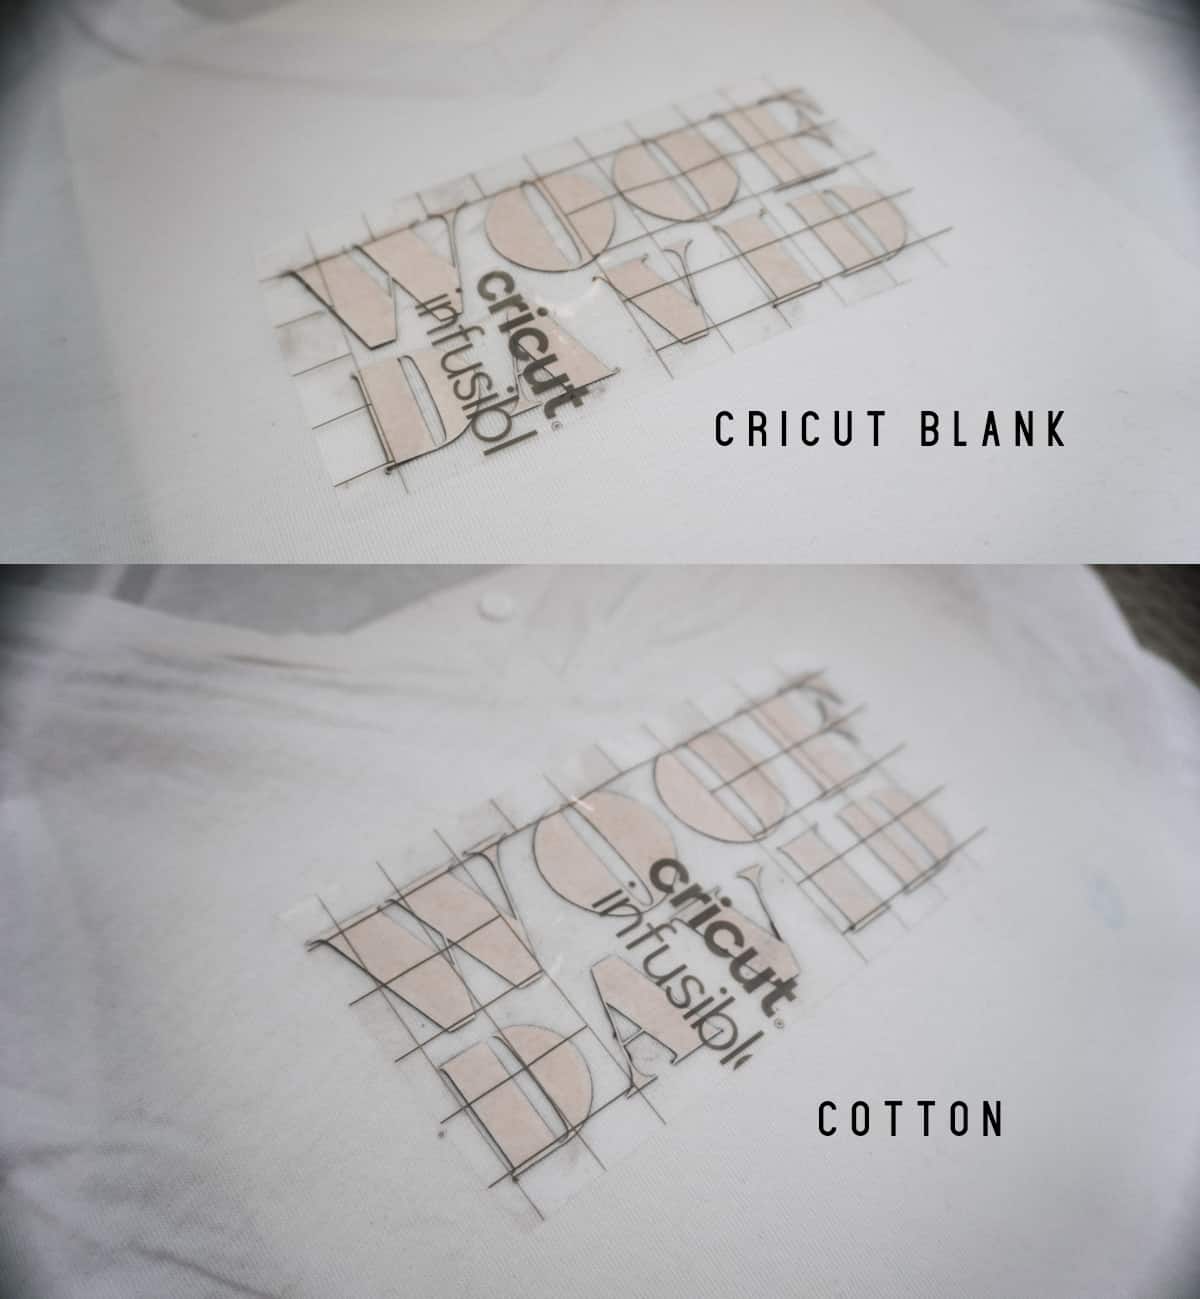 I compared Cricut Infusible Ink on the official Cricut blanks to just regular cotton. I'll give you my completely honest opinion if it's worth it.